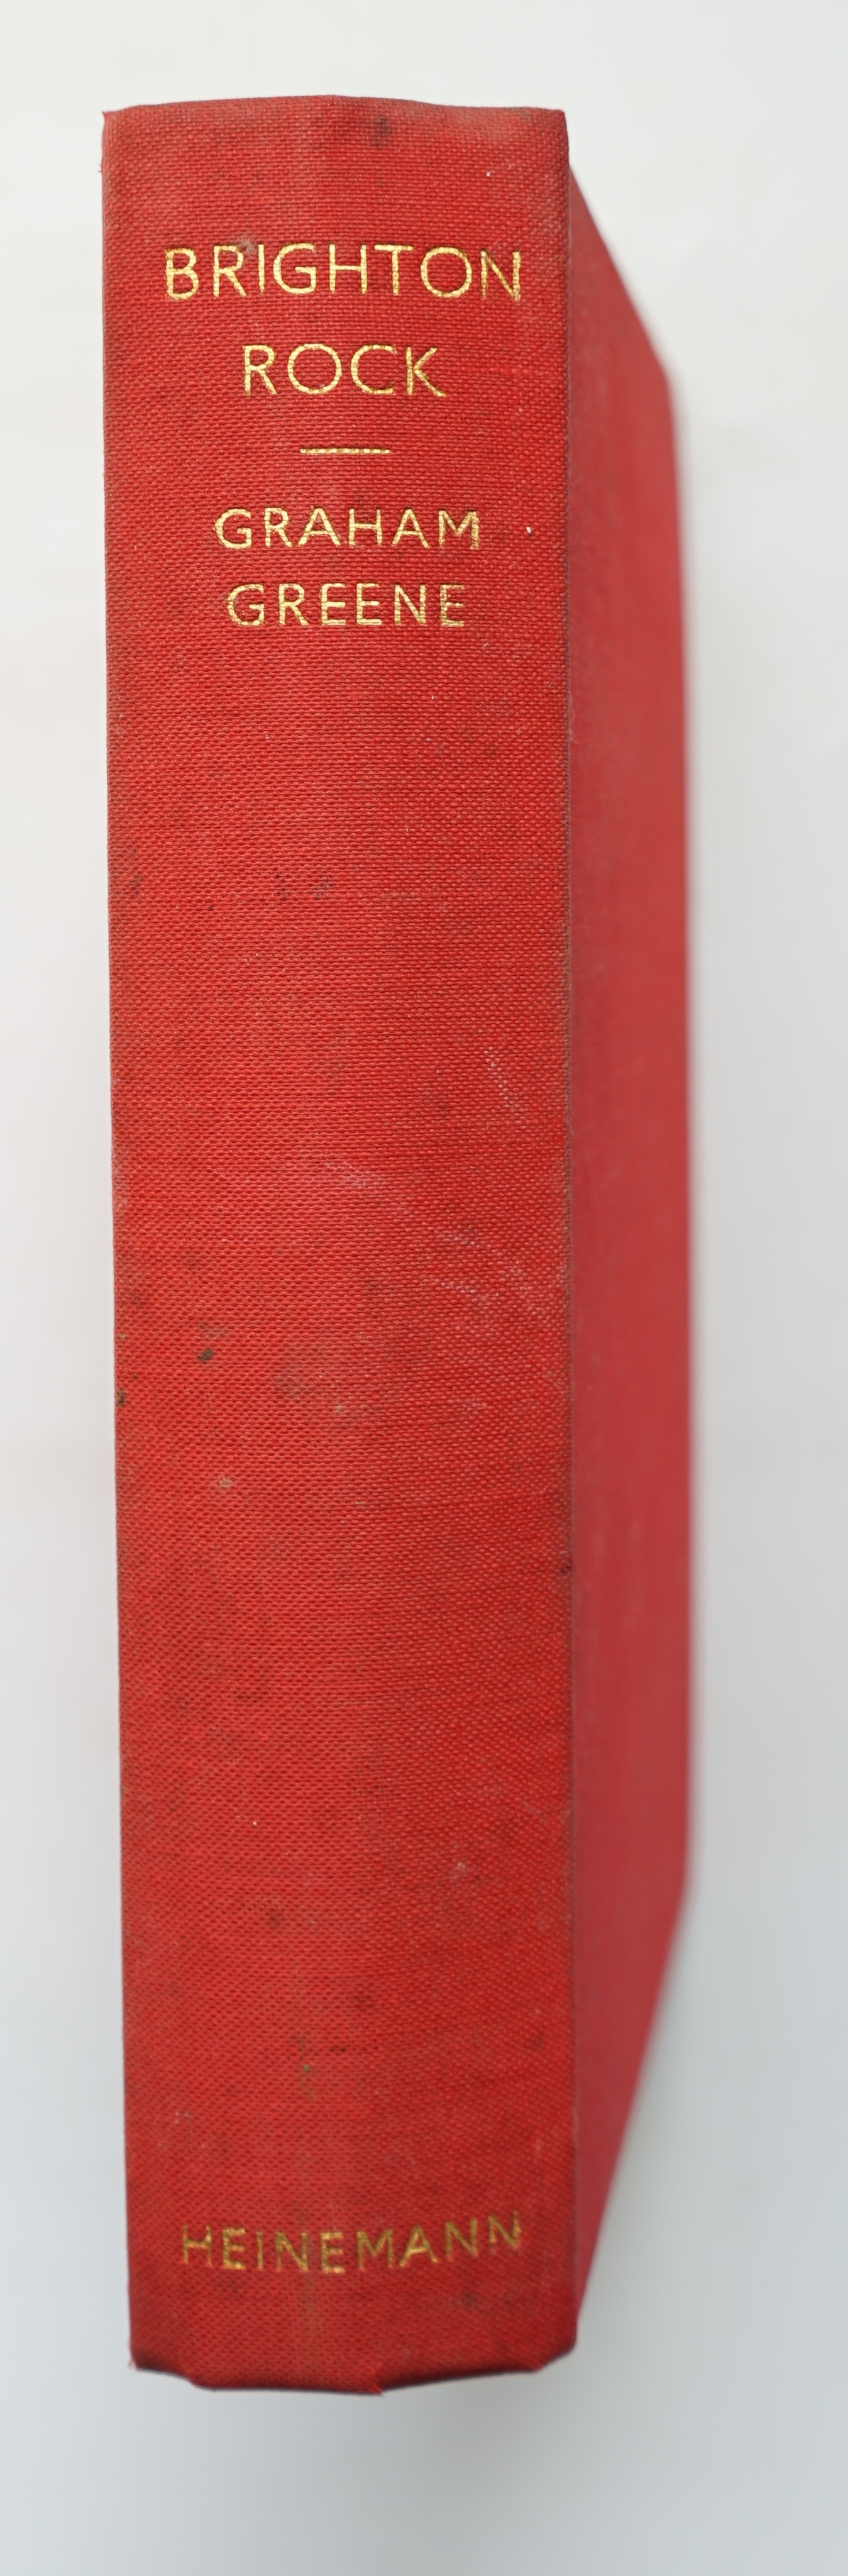 Greene, Graham - Brighton Rock, 1st English edition, 8vo, original red cloth, with some toning to margins and endpapers, (as often), closed tear to margin of pp, 343 and 359, William Heinemann Ltd., London, 1938.